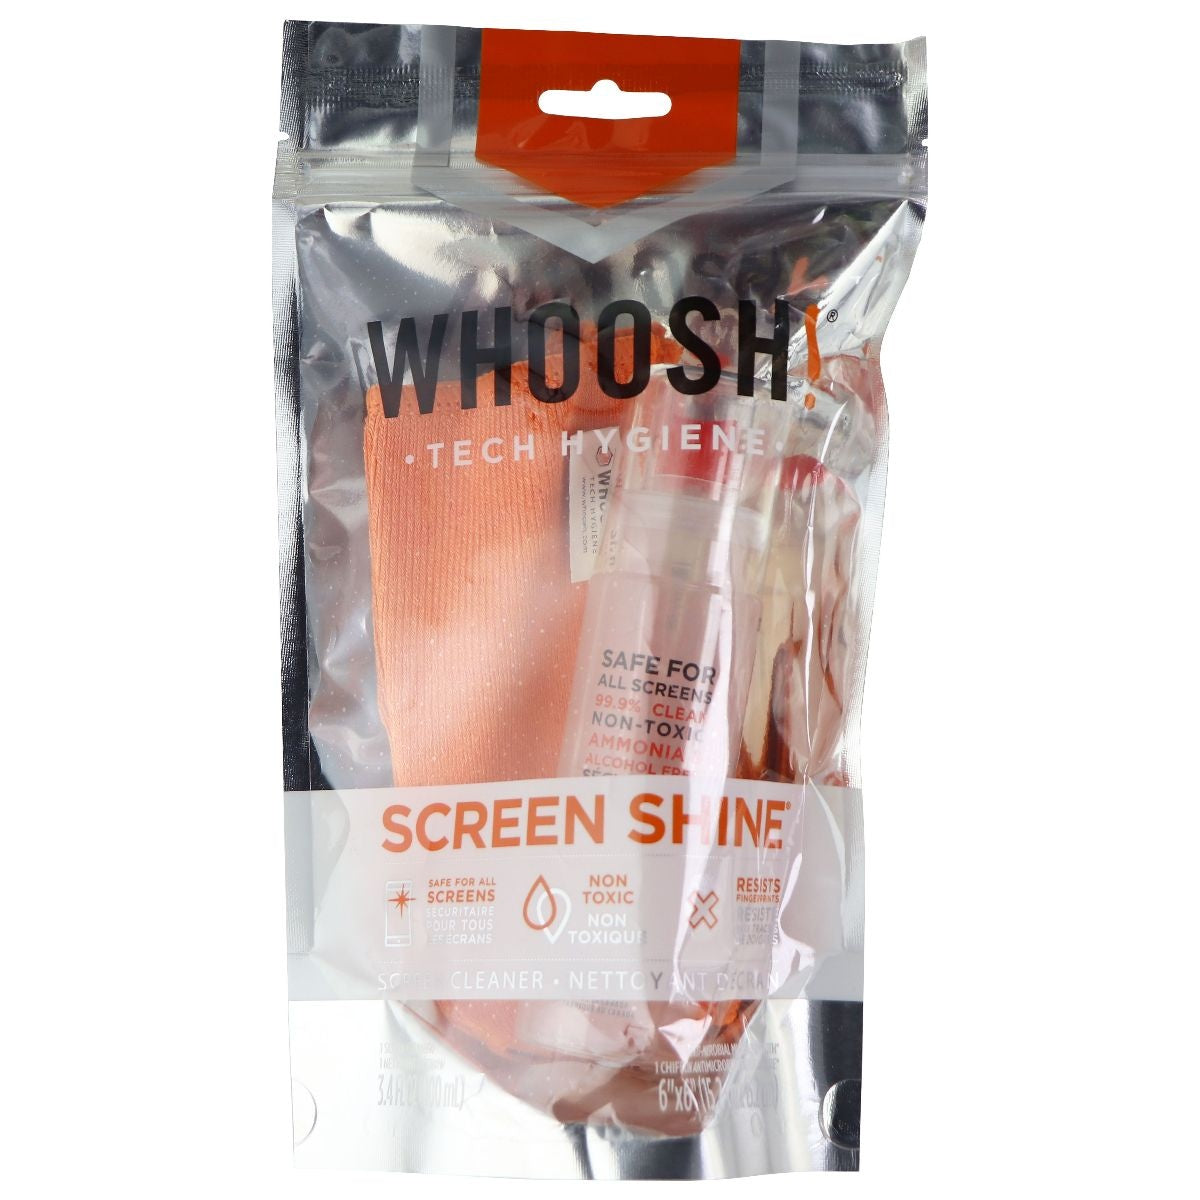 Whoosh! Tech hygiene Screen Shine Pack - Orange Cloth (3.4 fl oz) Cell Phone - Other Accessories WHOOSH    - Simple Cell Bulk Wholesale Pricing - USA Seller